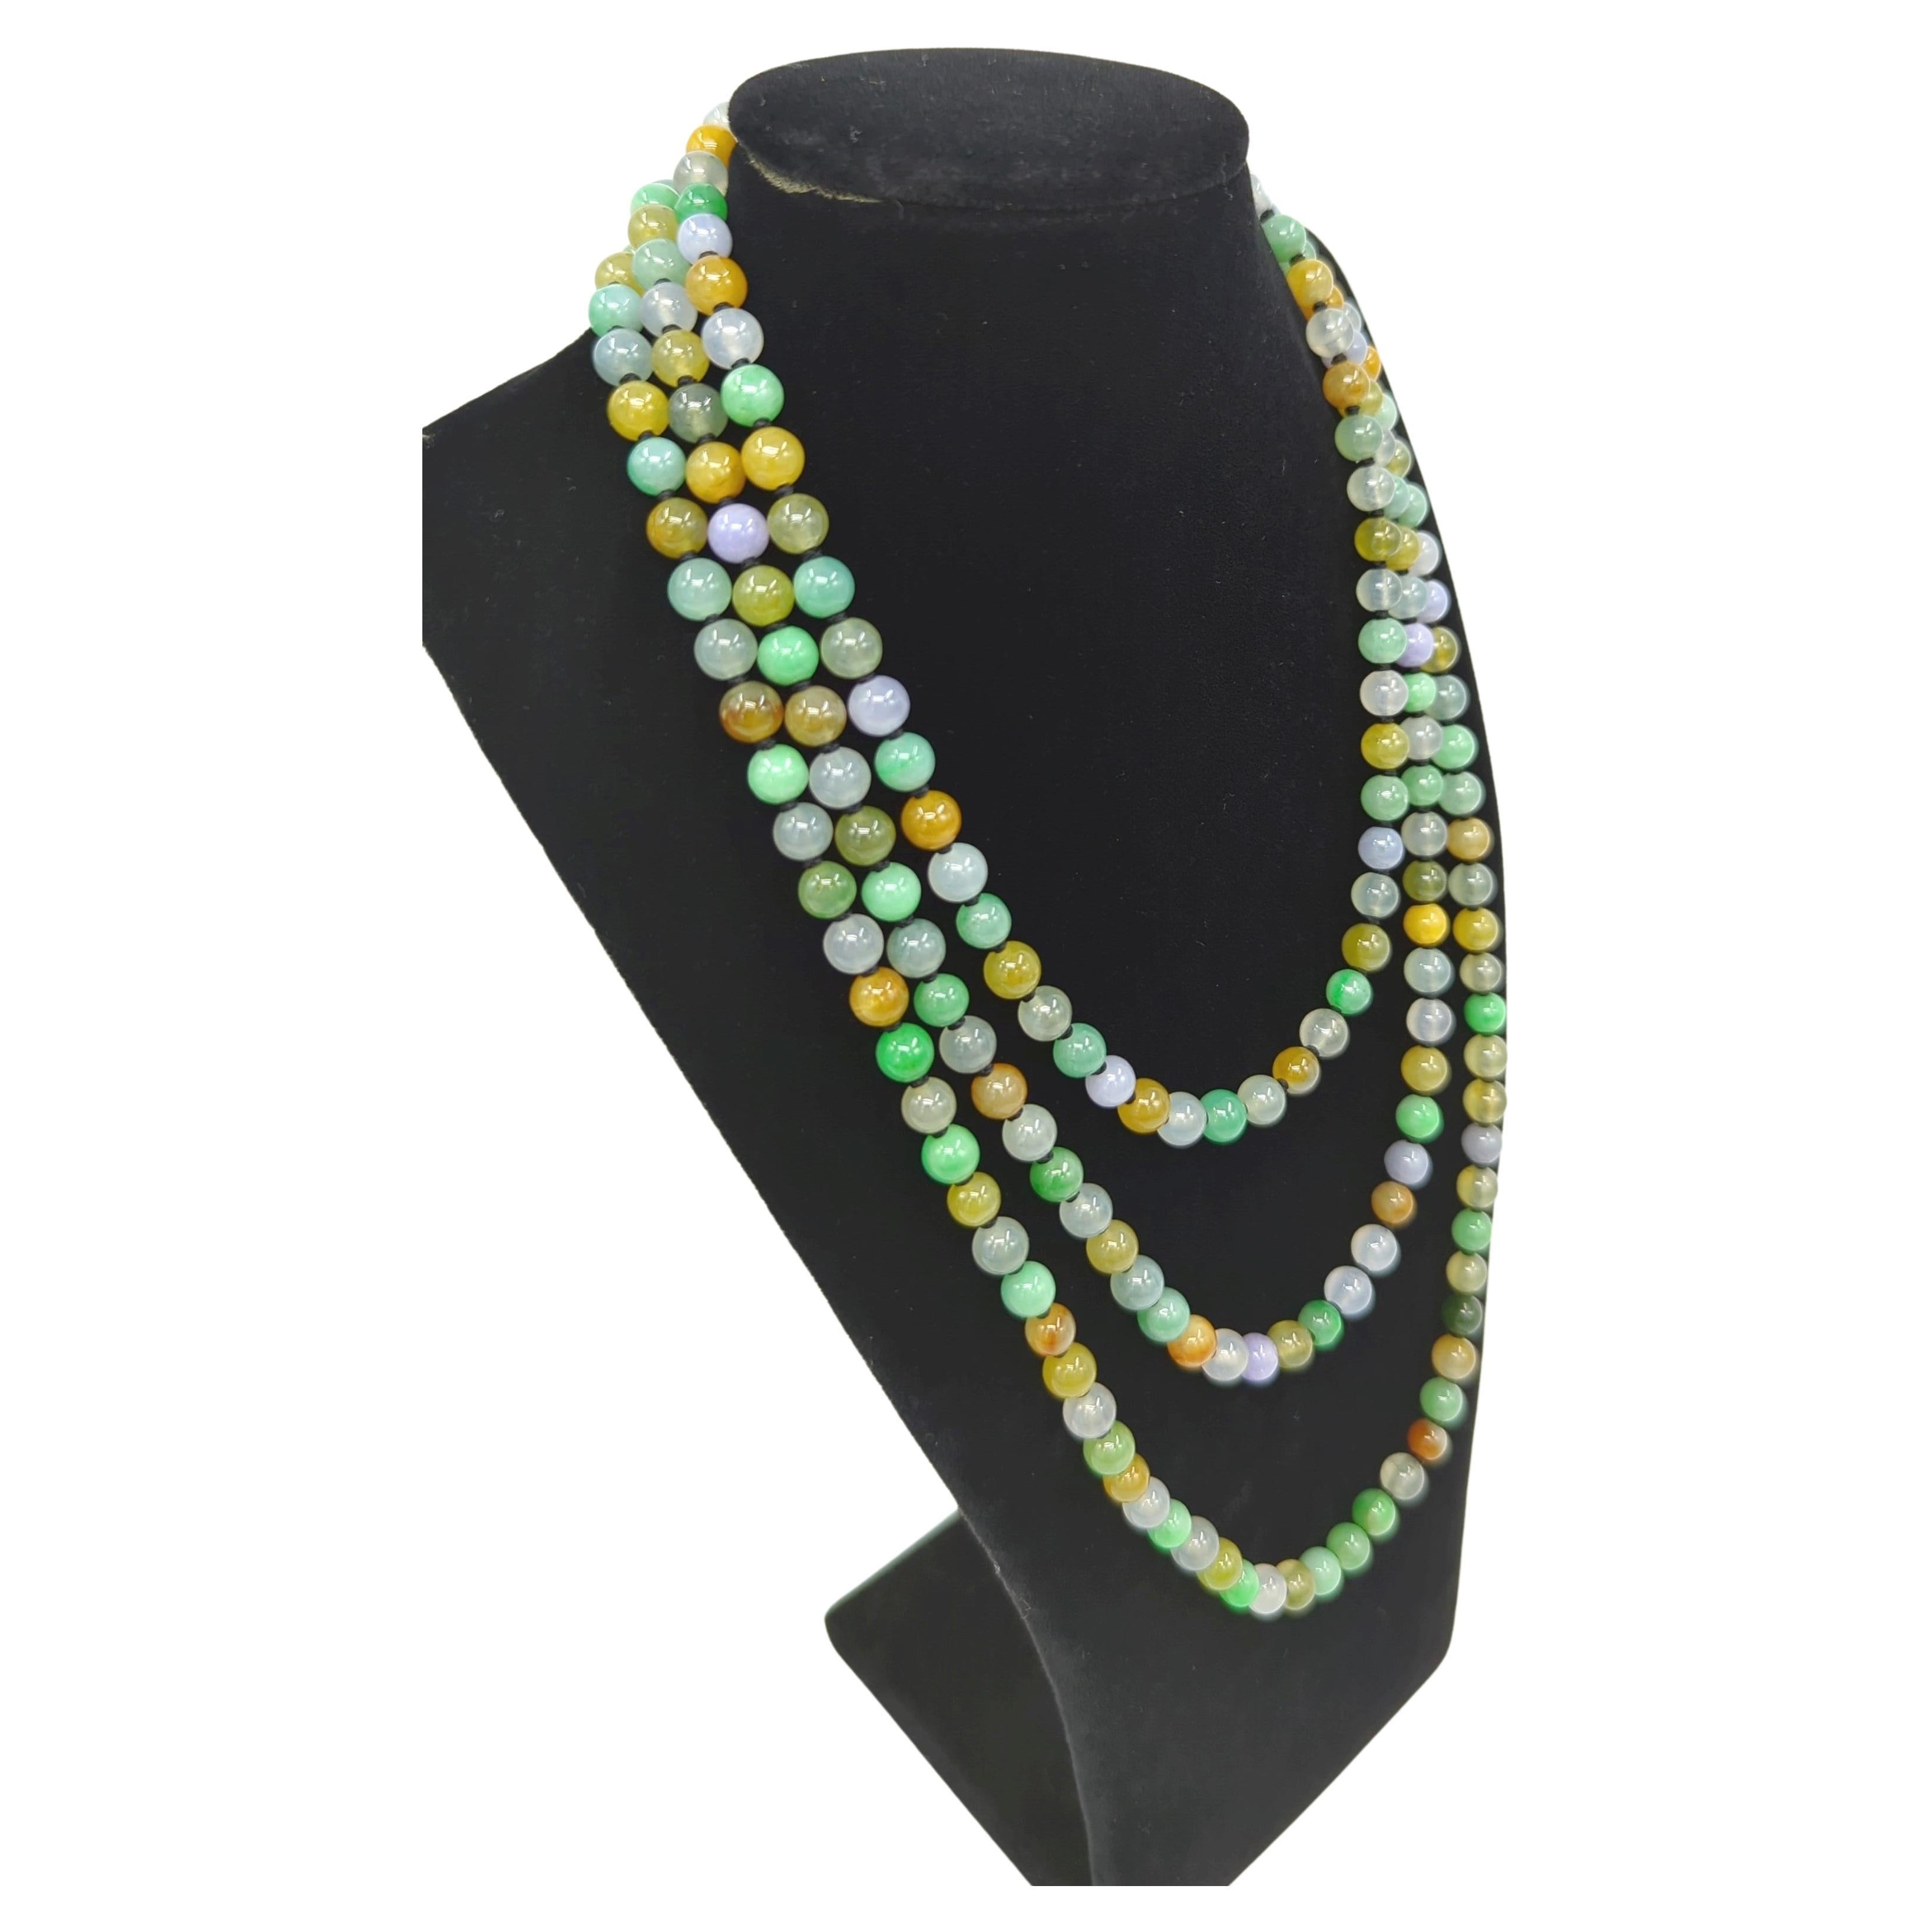 Artisan Exquisite Multicolor Icy Jadeite A-Grade 200 Beads Necklace Very Long Strand 52